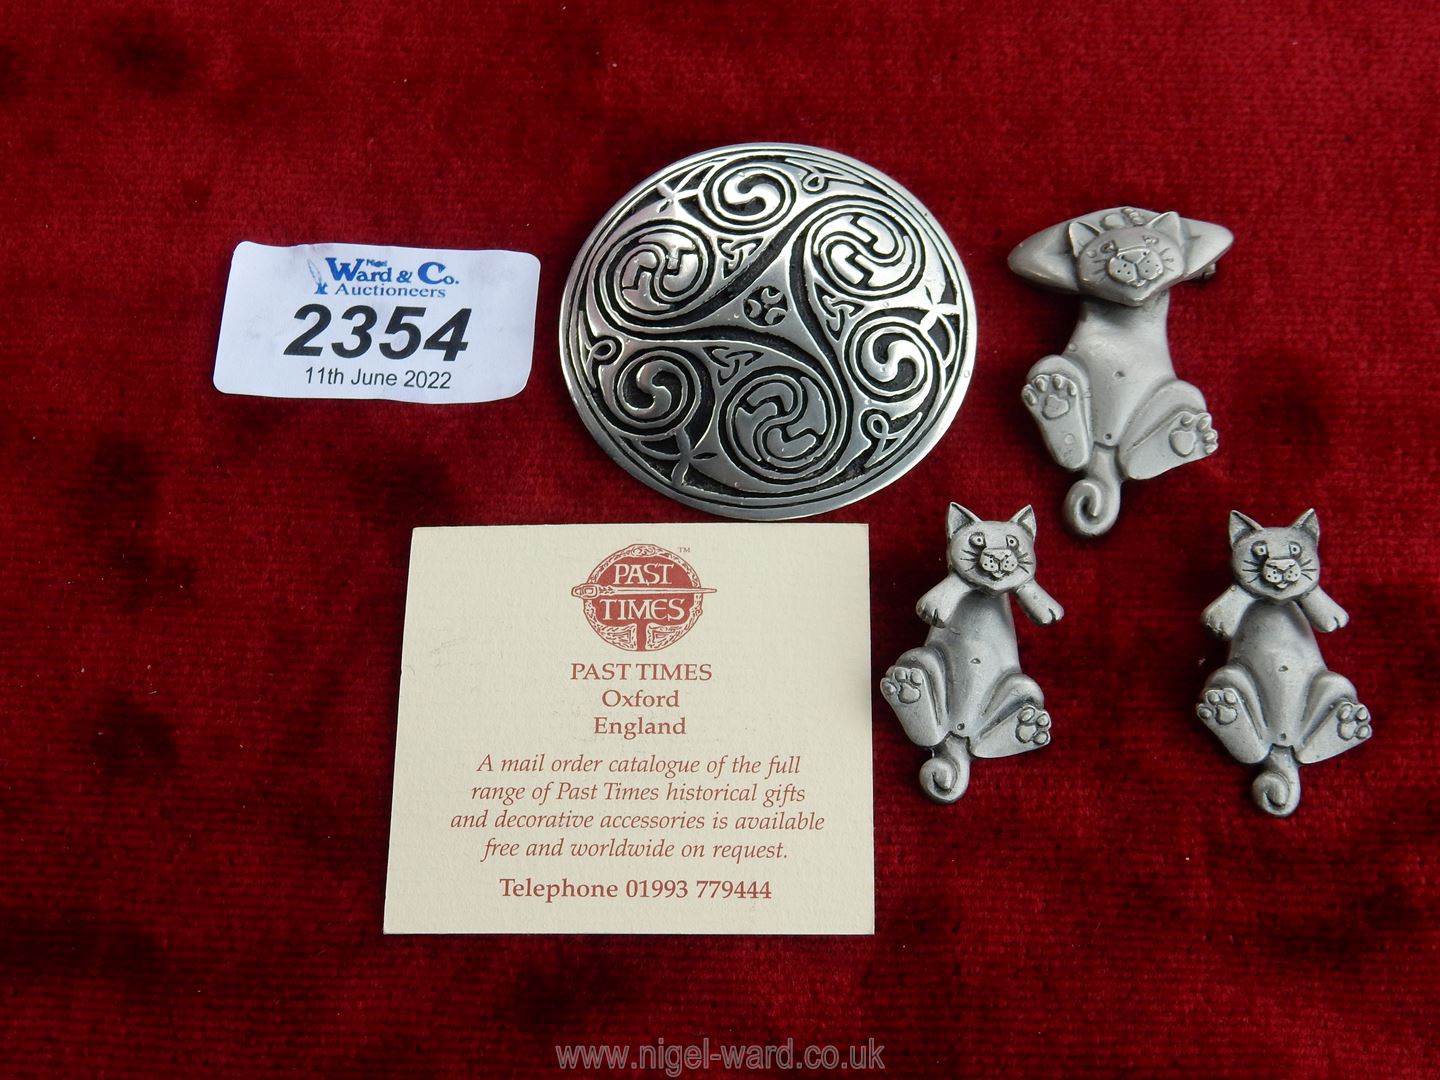 A Pastimes pewter Celtic swirl brooch inspired by the Book of Kells,